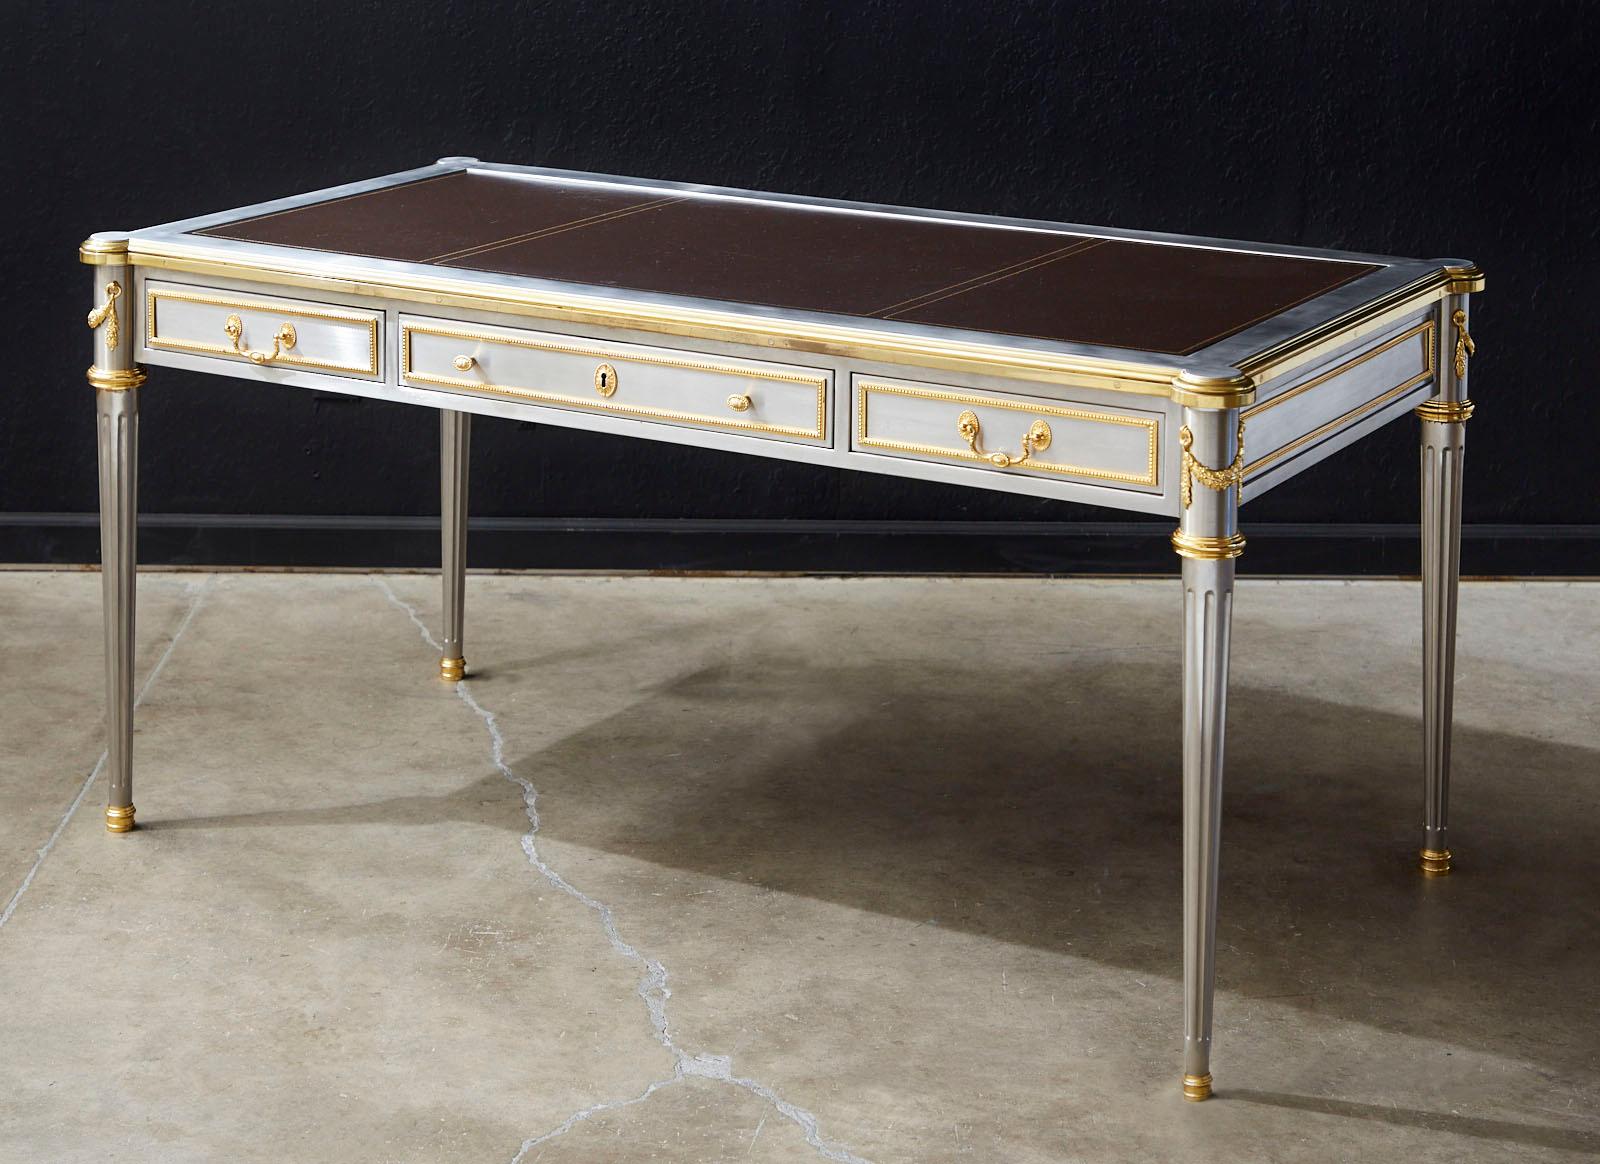 Opulent and rare 1960s stainless steel and bronze writing table, bureau plat desk designed by John Vesey (American 1924-1992). Made in the grand neoclassical French Louis XVI taste featuring gilt bronze trim and an iconic profile with elegant fluted